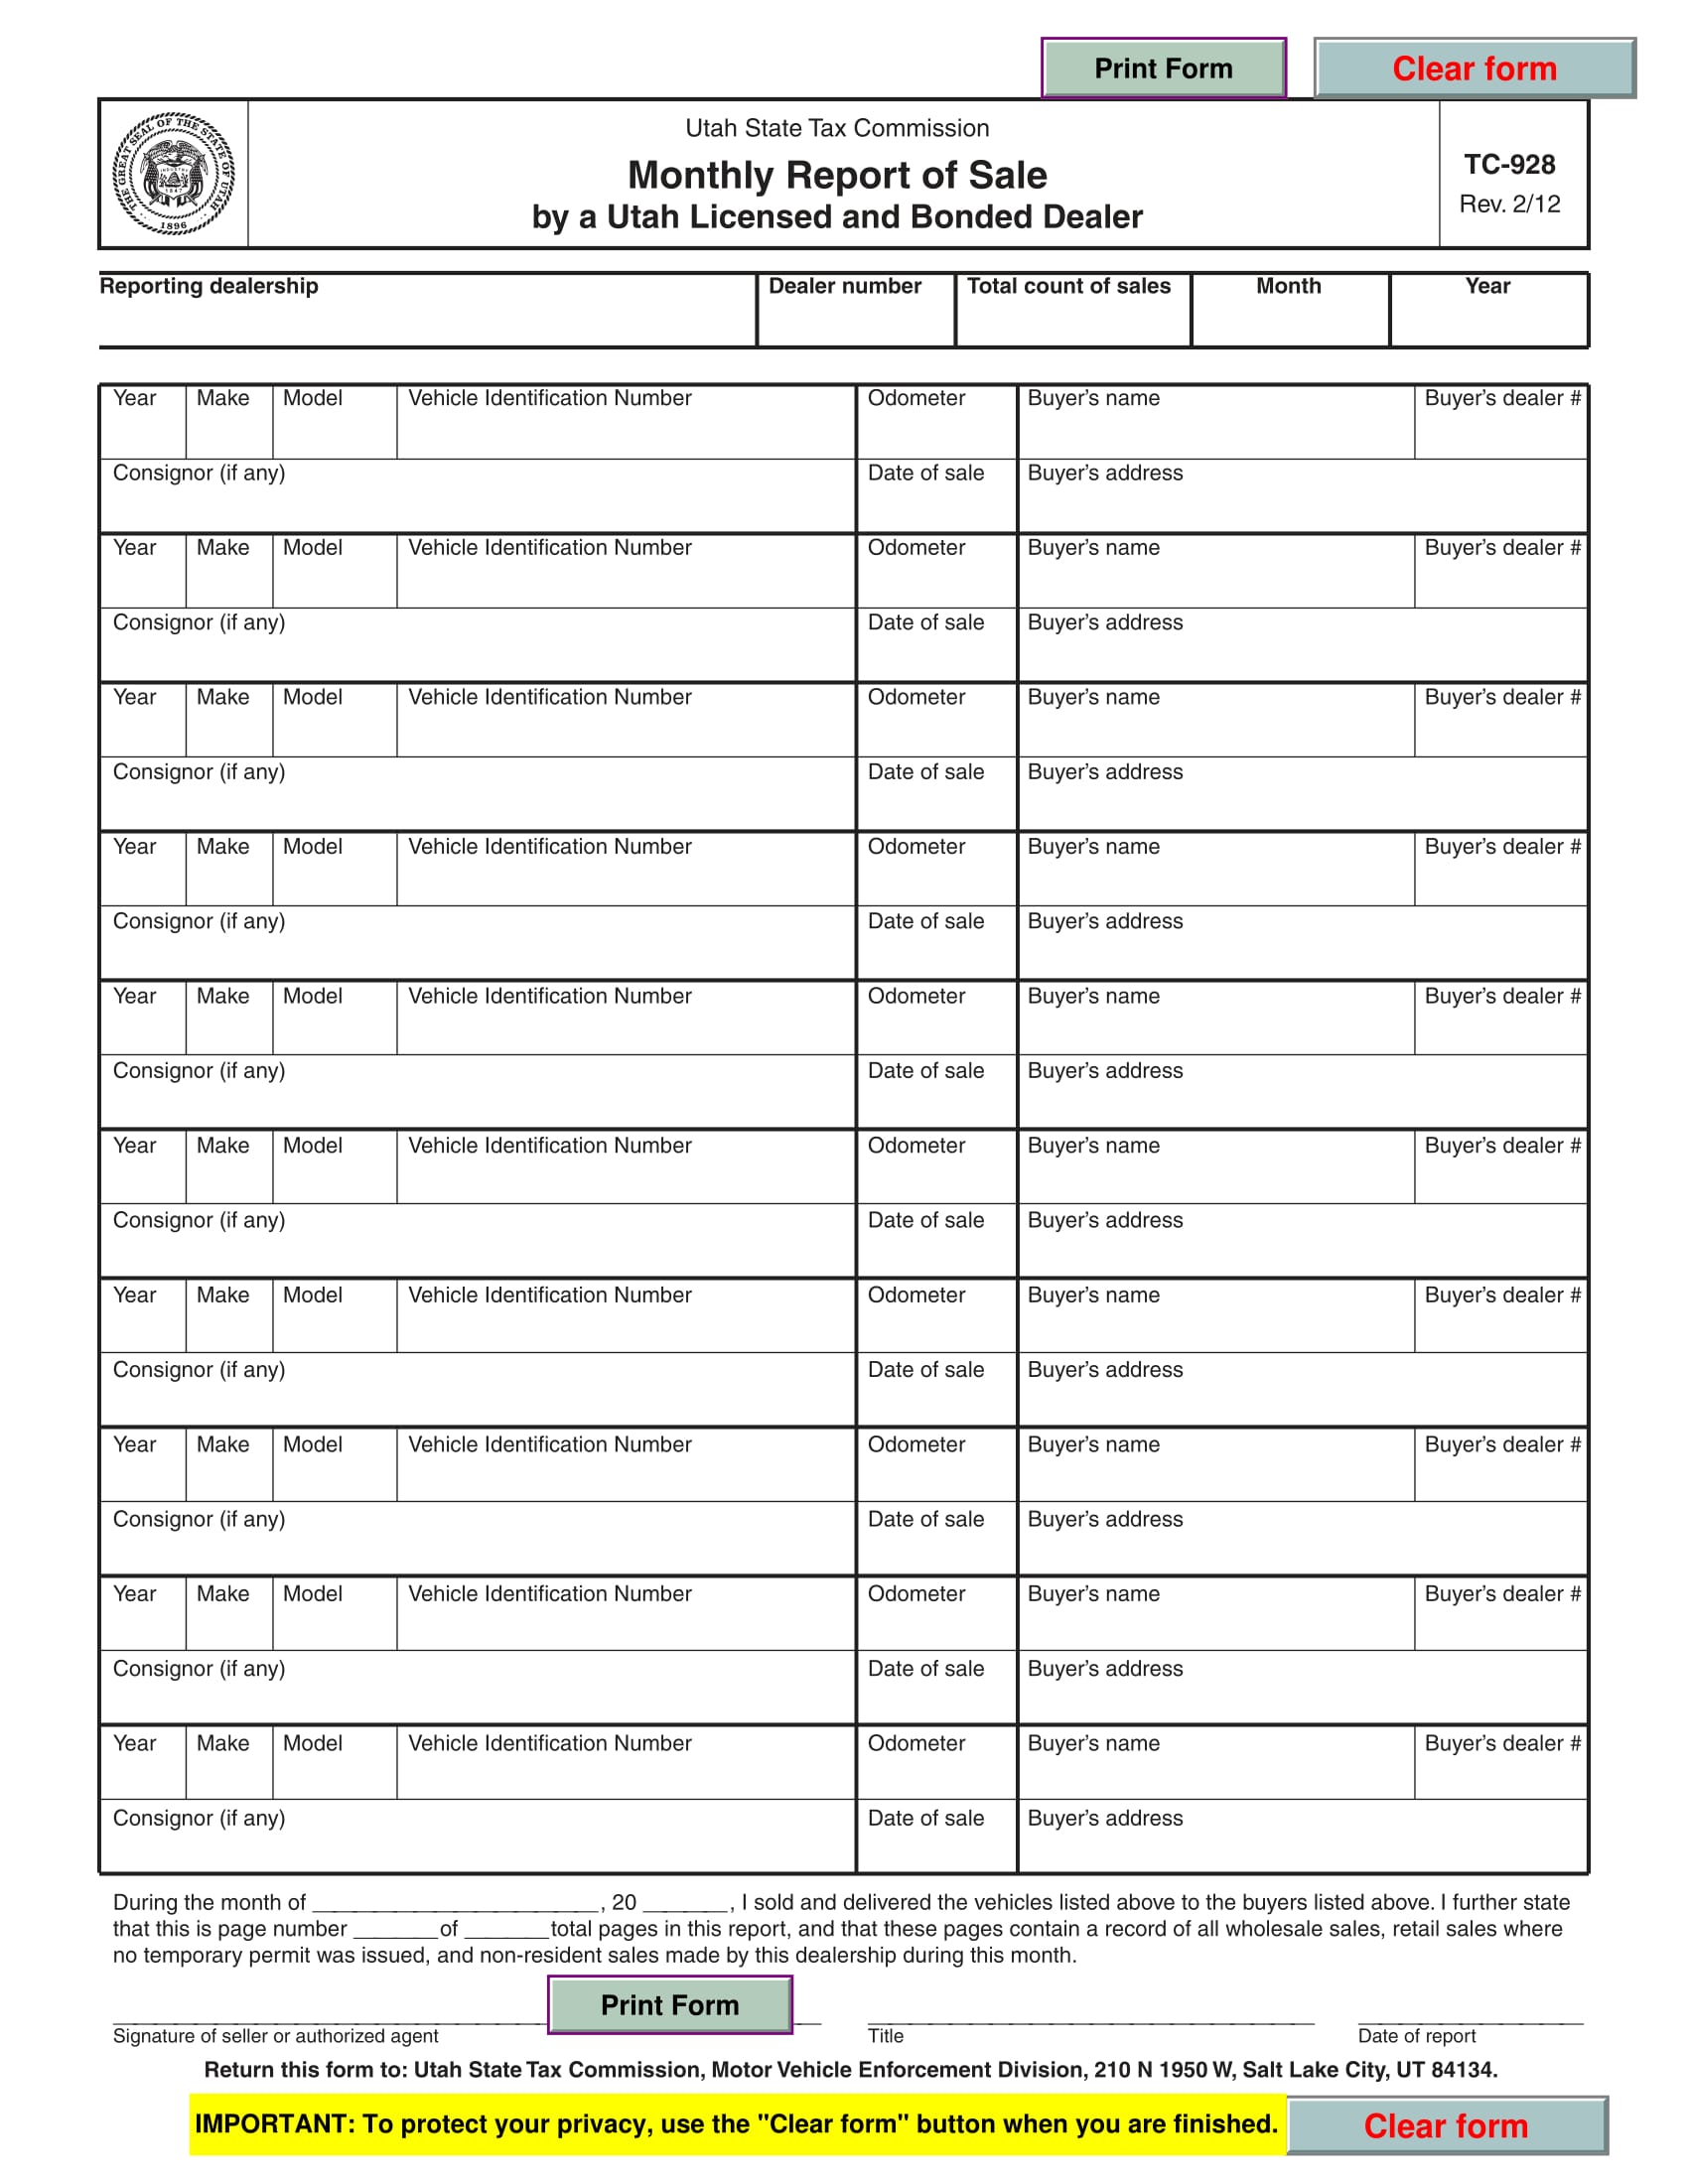 fillable monthly sales report form 1